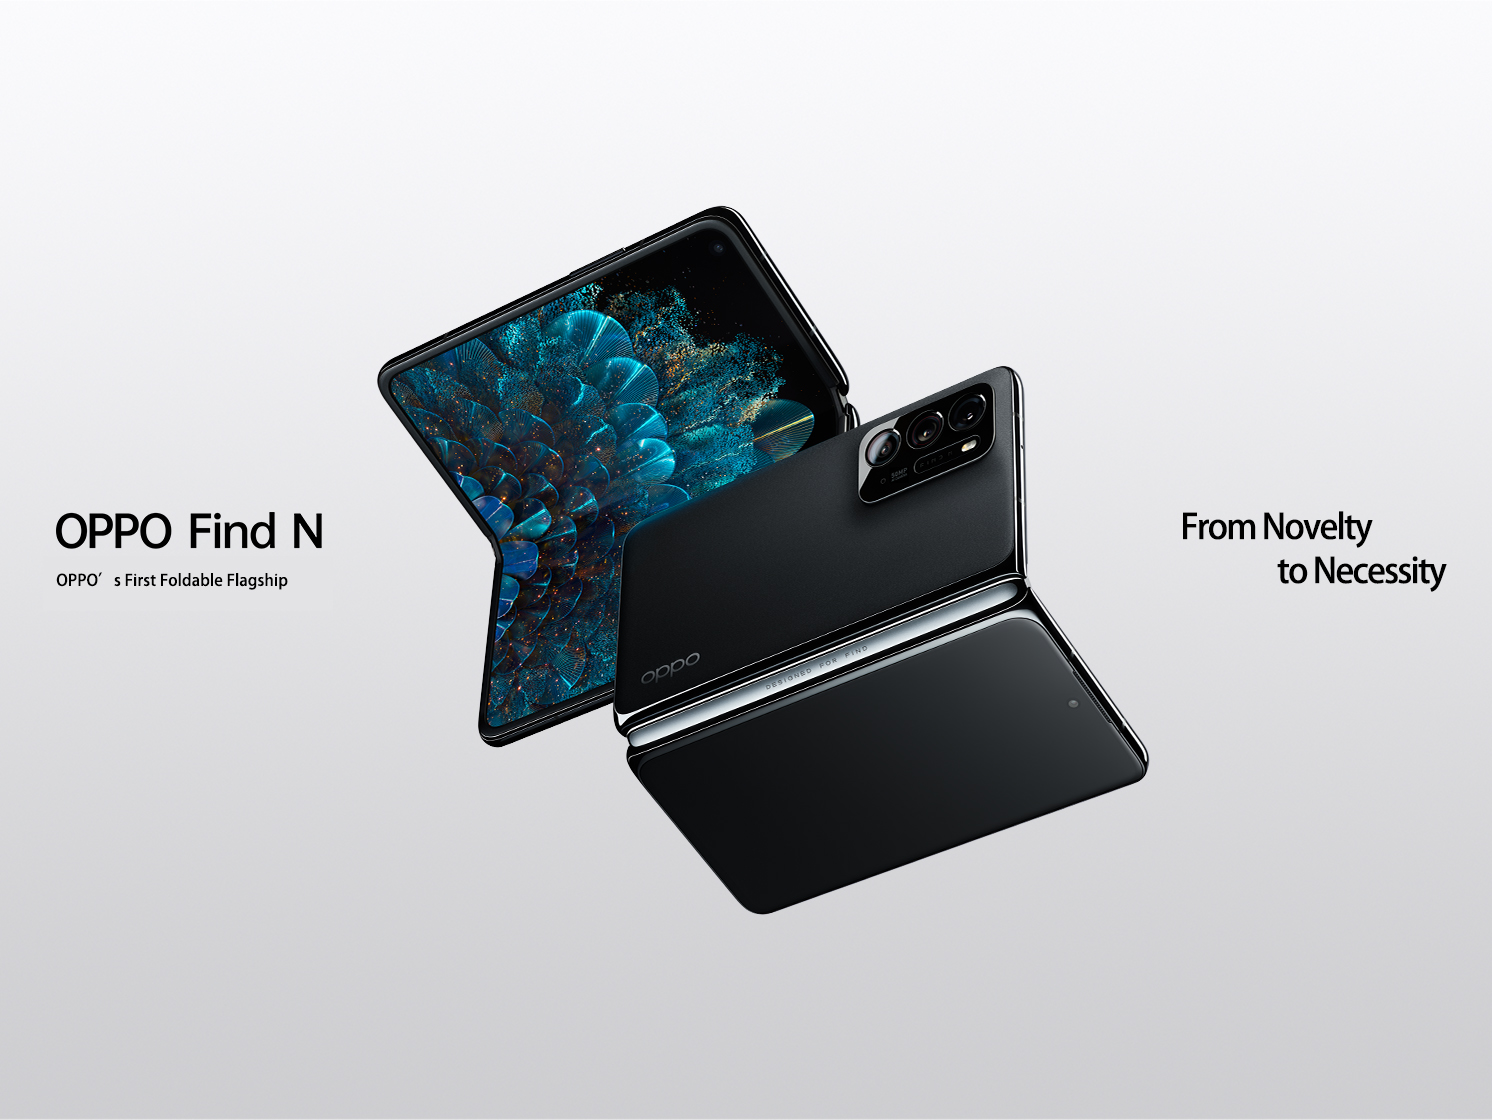 OPPO Launches Its First Foldable Flagship Smartphone, the OPPO Find N, at INNO DAY 2021